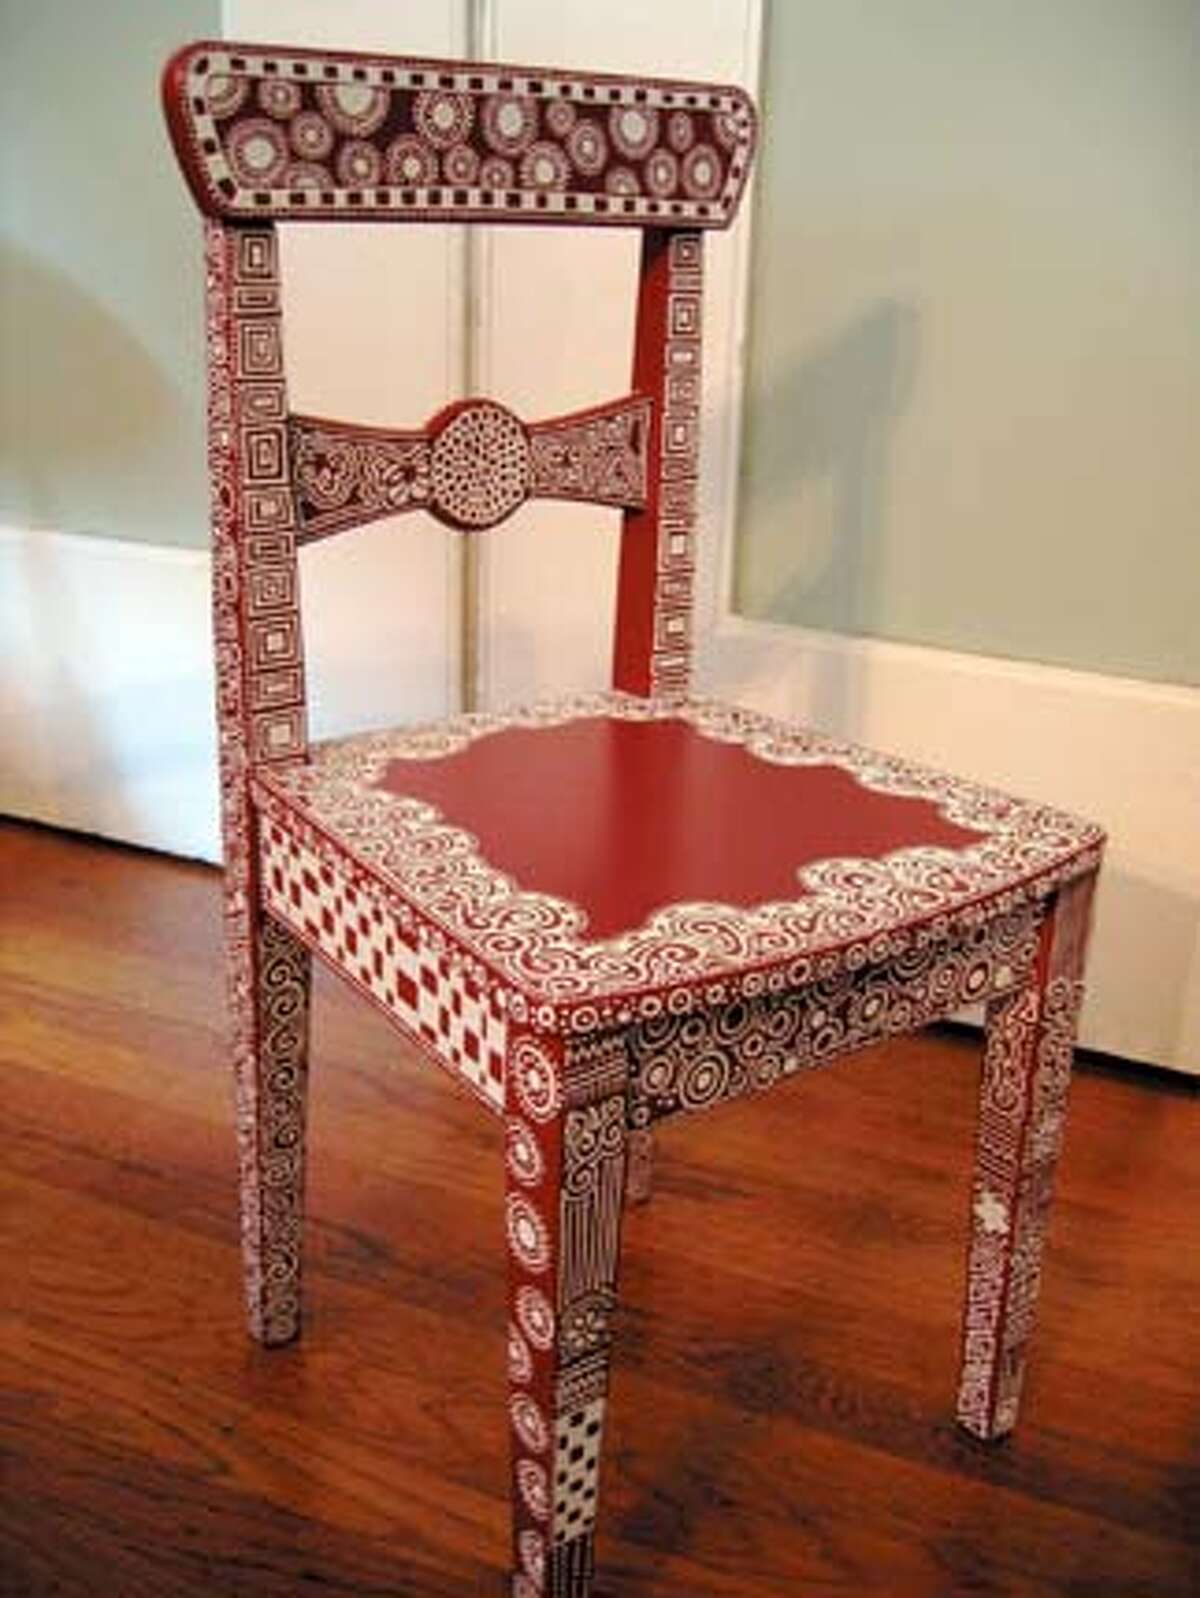 Hand-painted chair by Carmela Chase.